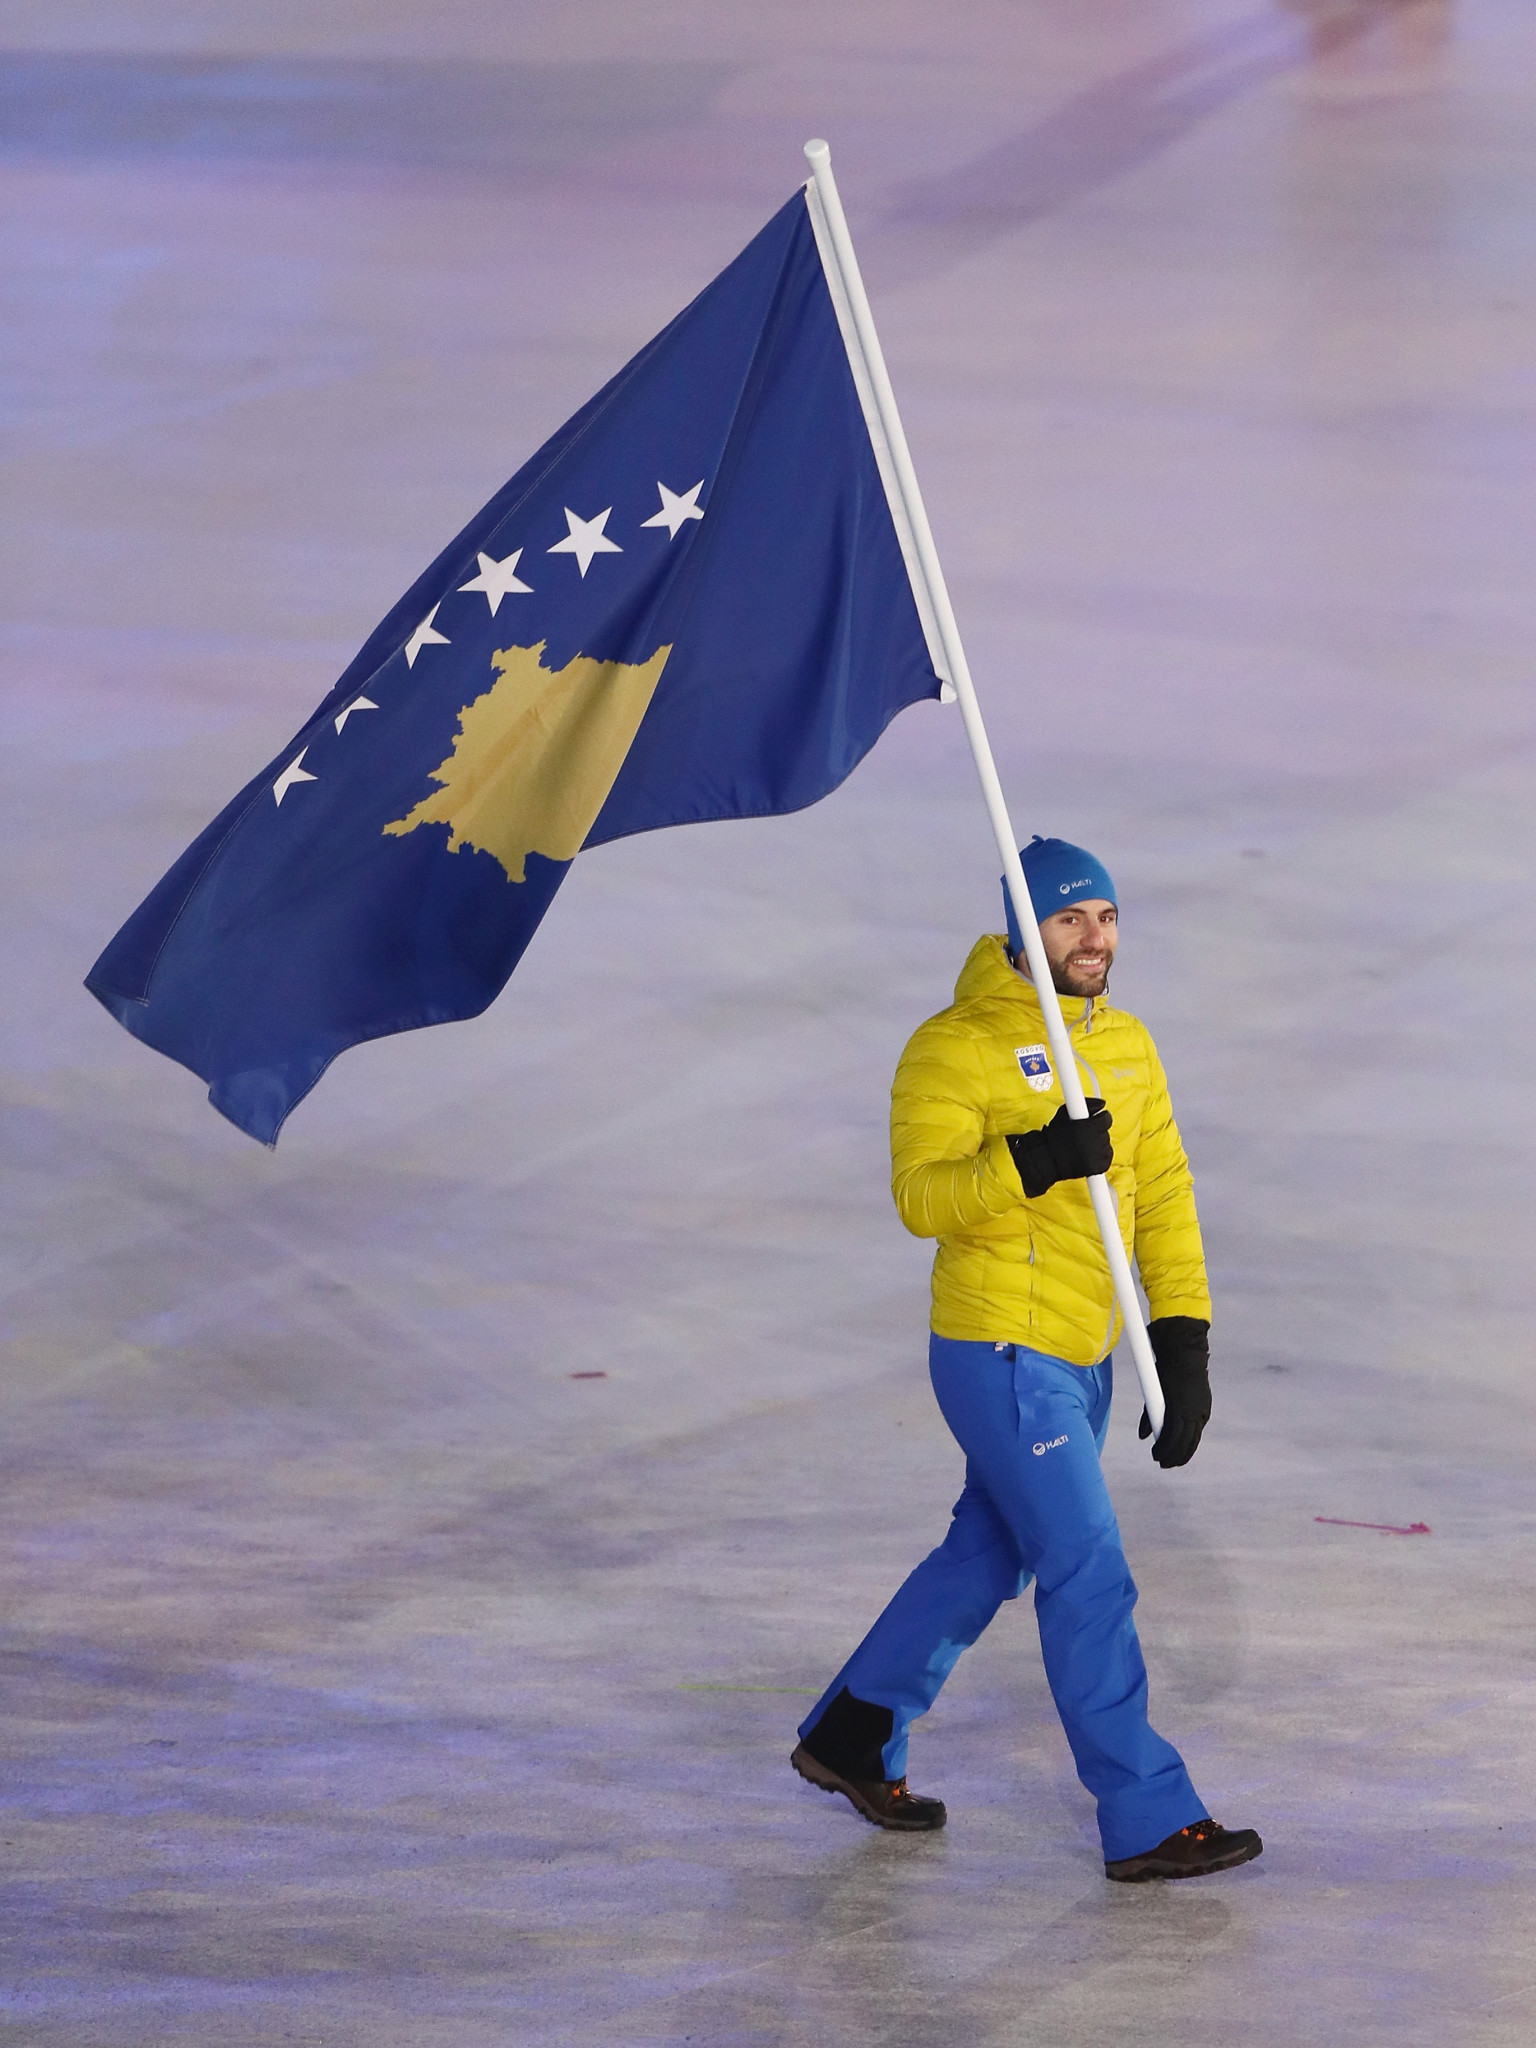 Kosovo is an emerging nation in world sports ©Getty Images